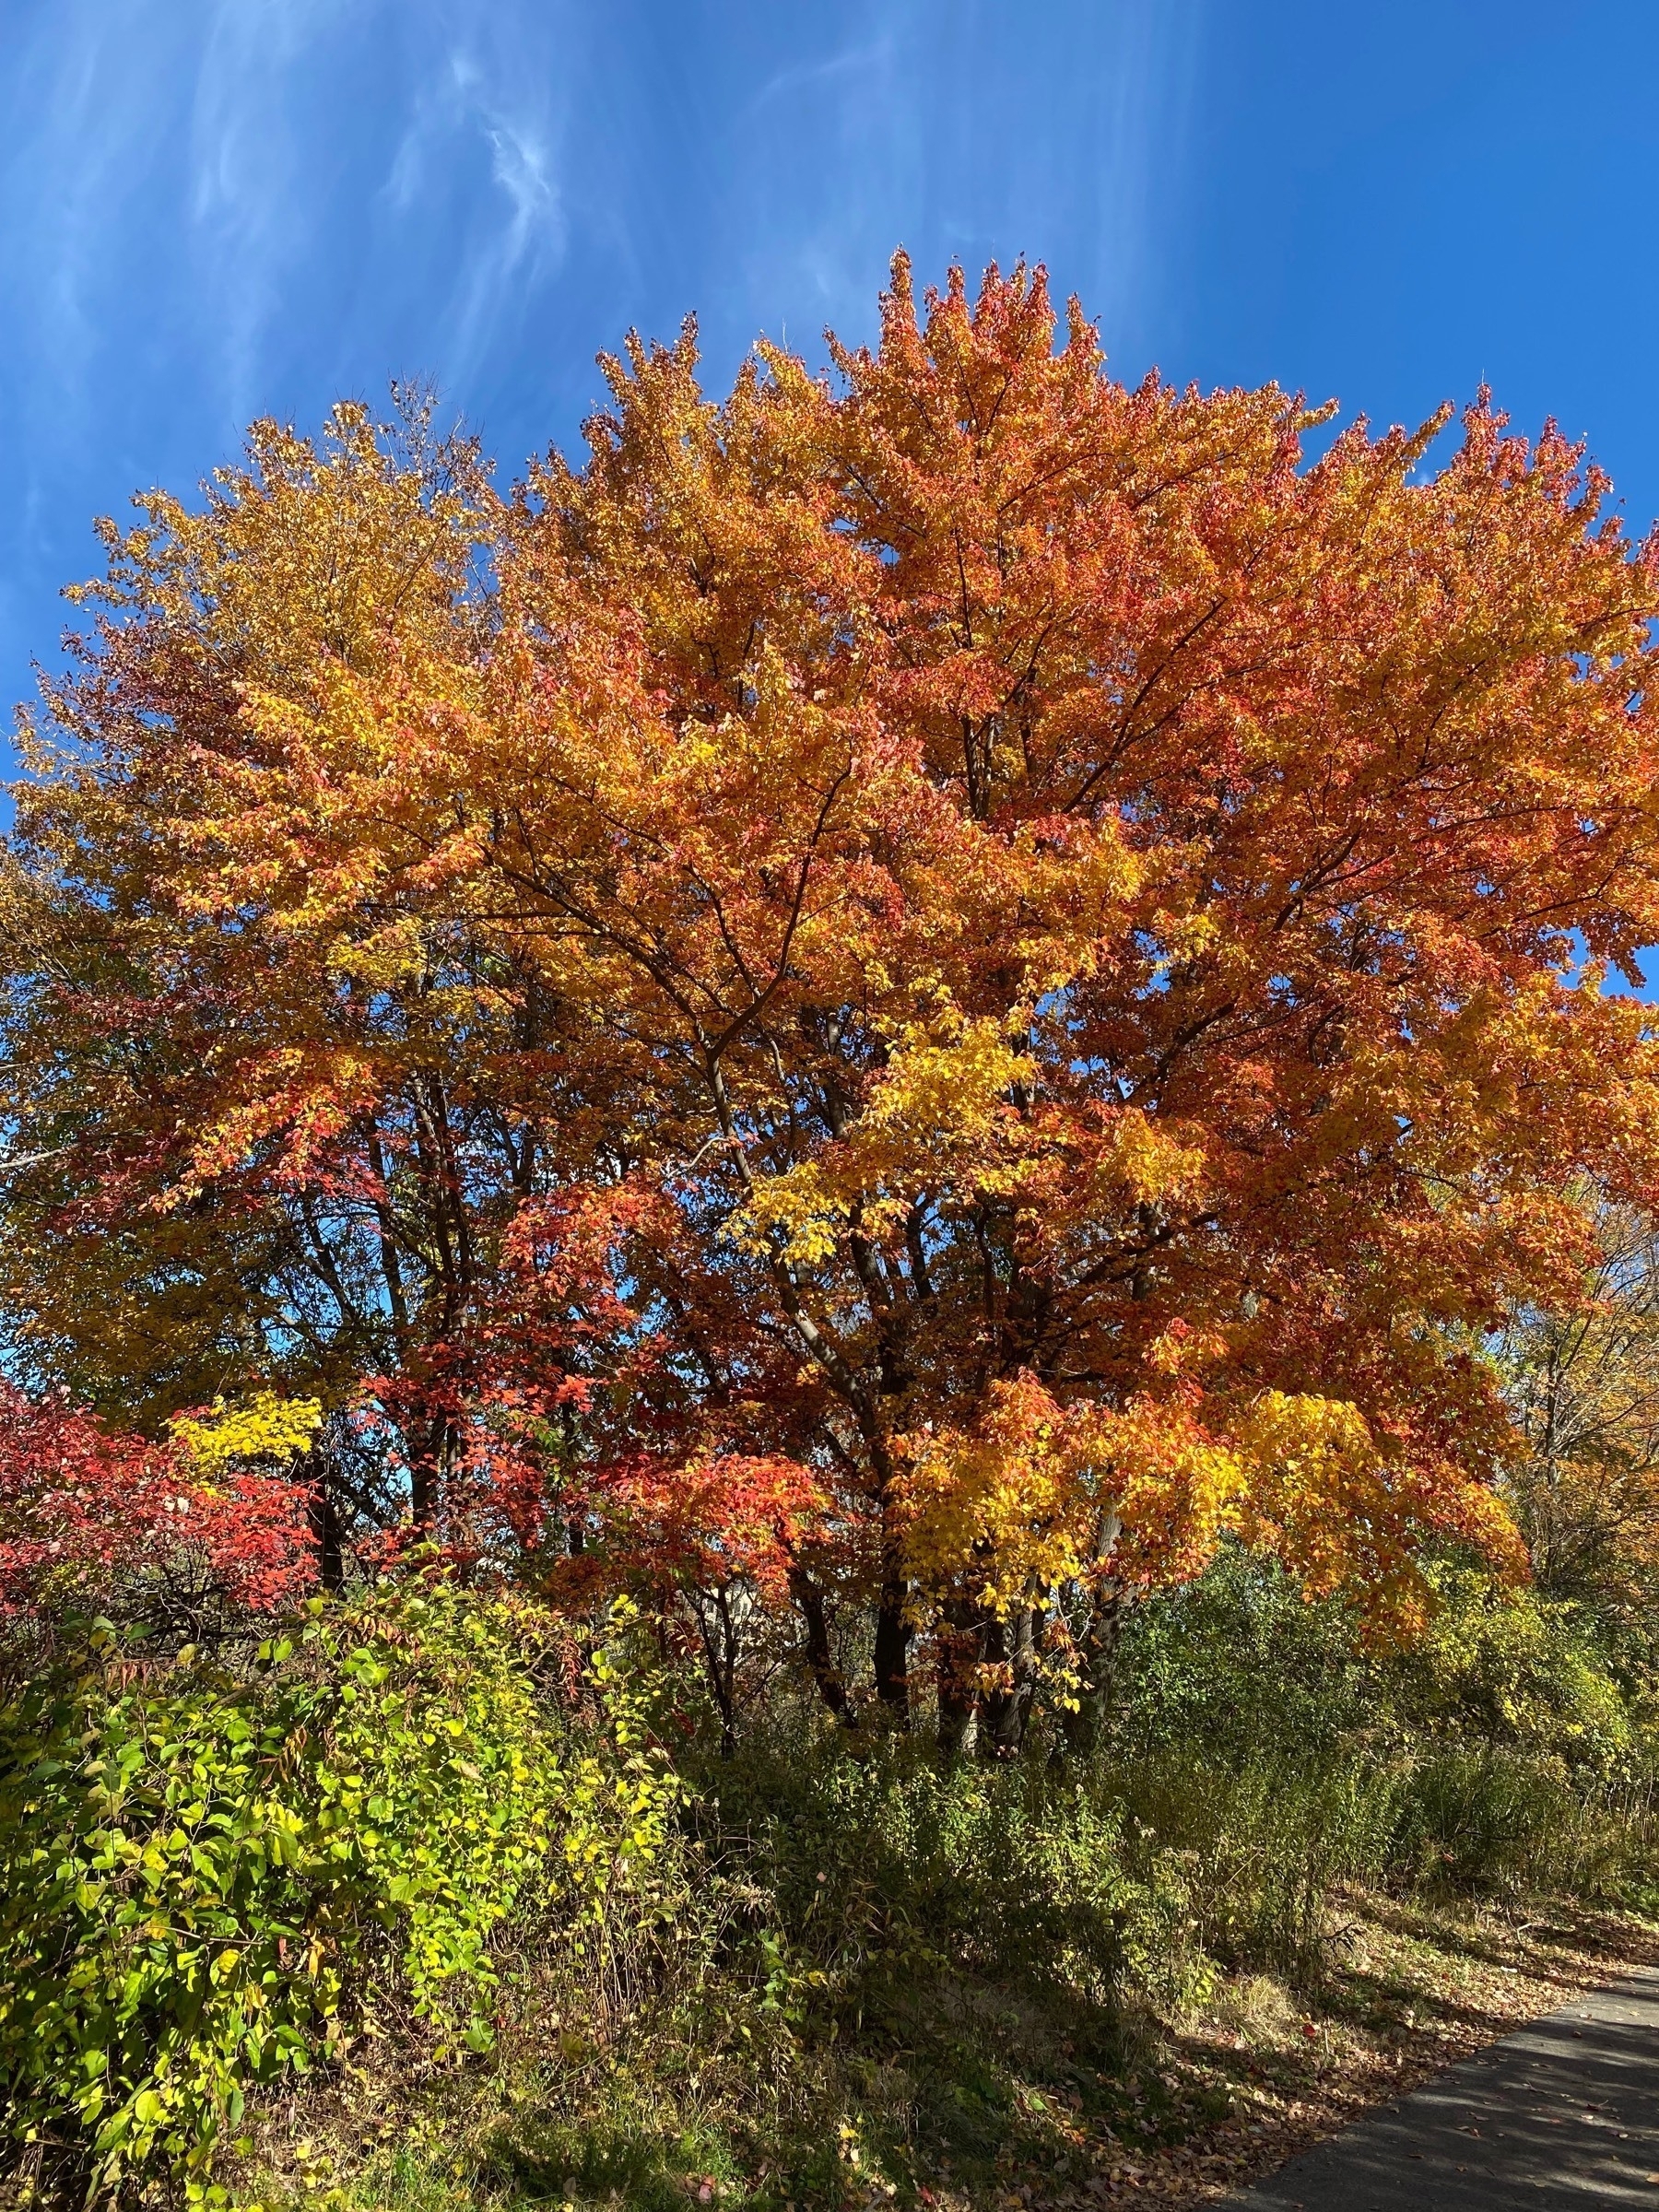 View of several trees with bright yellow and orange fall foliage.